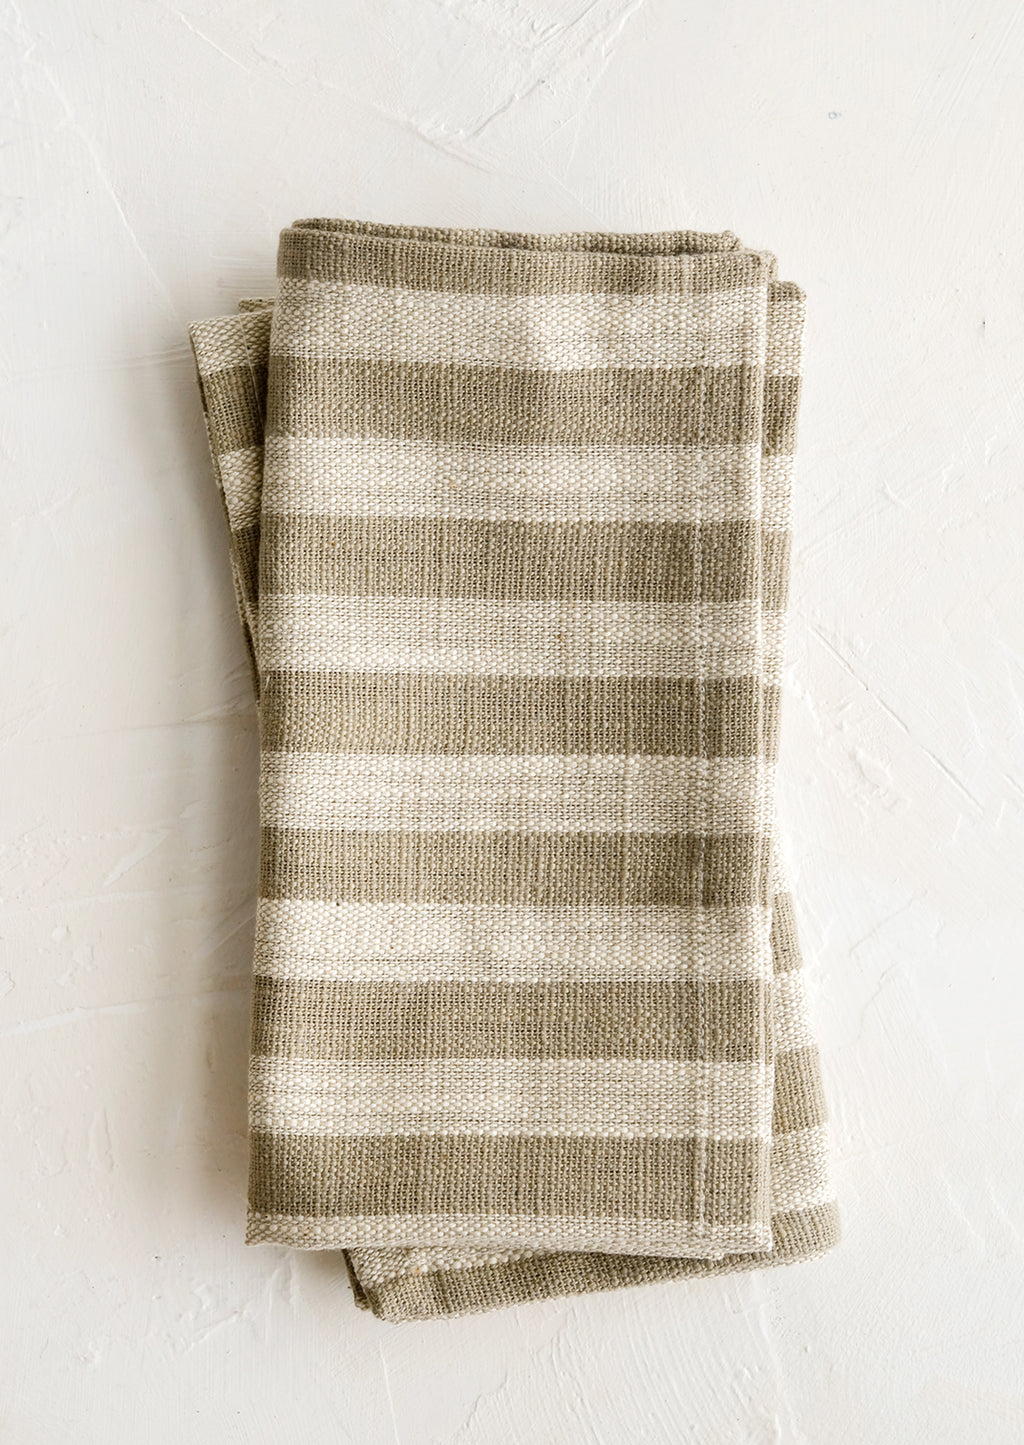 Tan / Ivory (Full Stripe): A pair of folded napkins in tan with wide ivory stripes throughout.